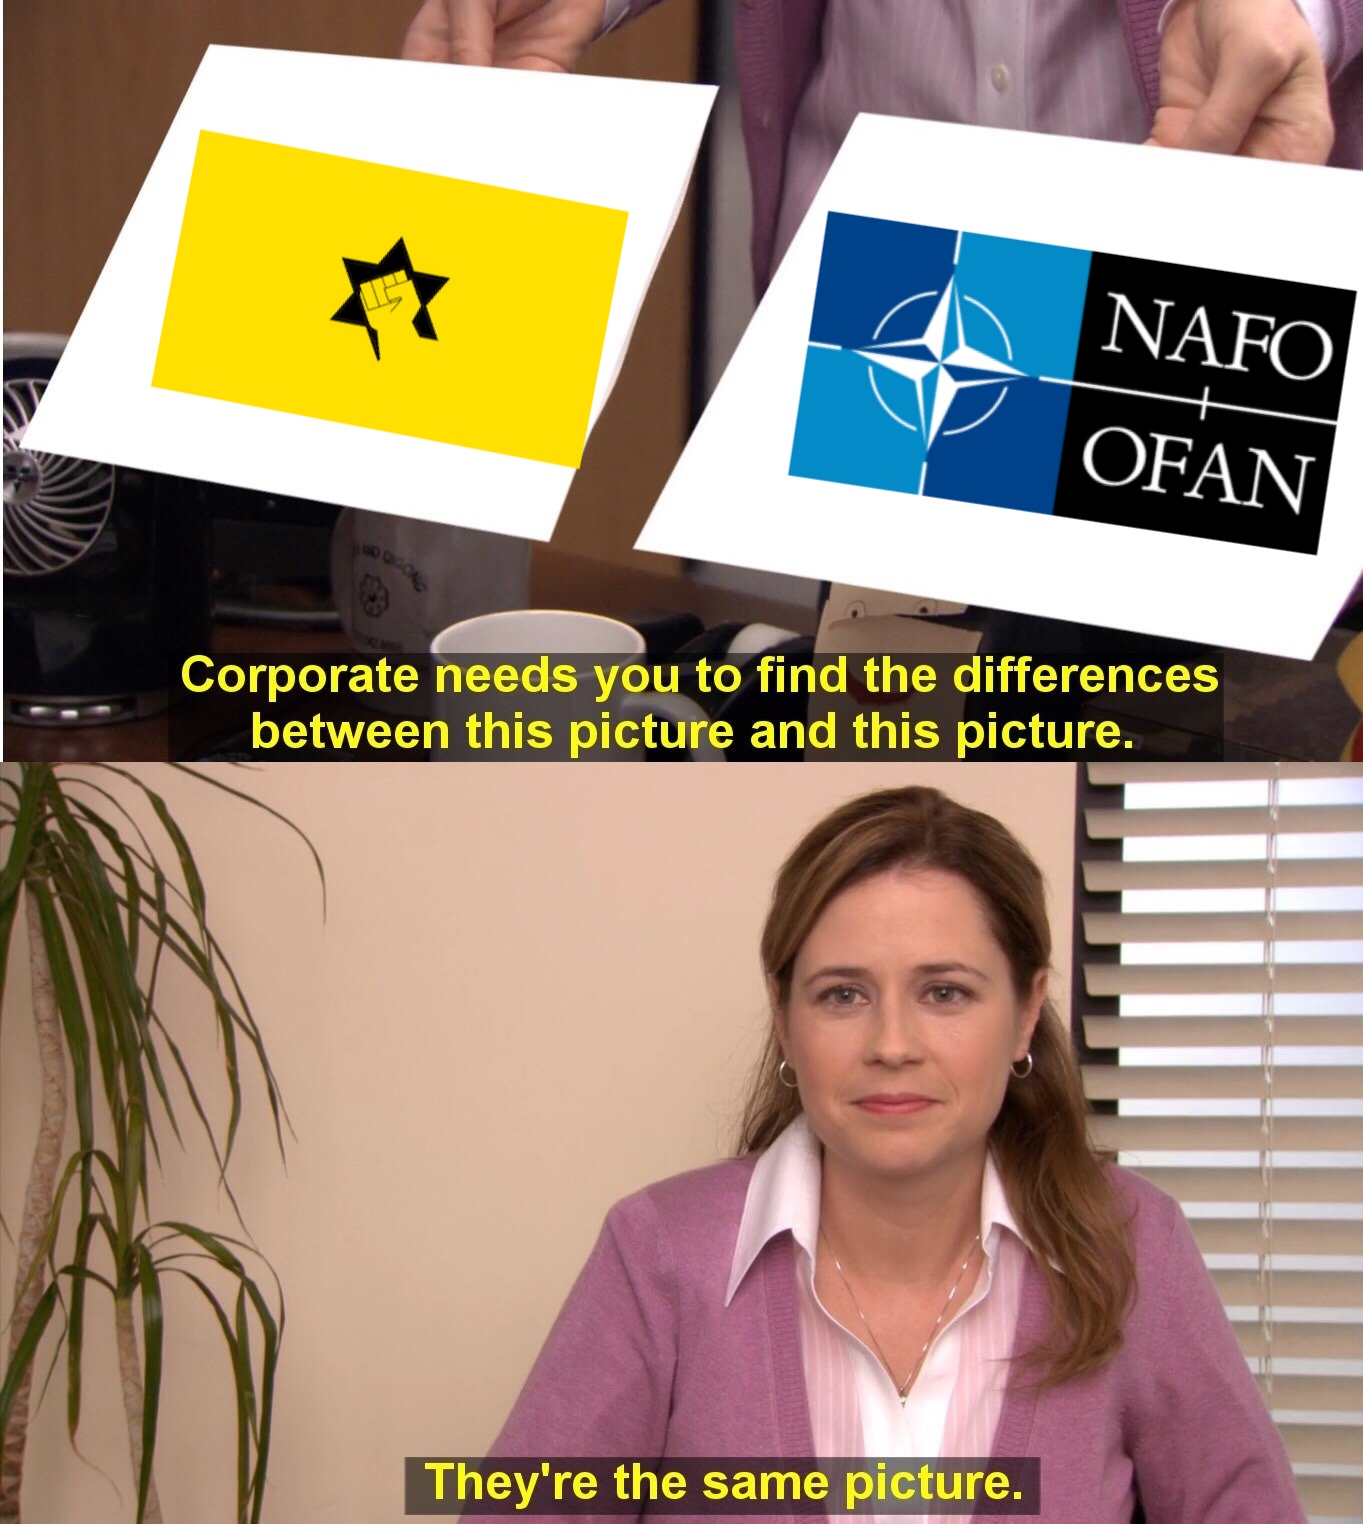 IDL flag  NAFO flag: They’re the same picture.